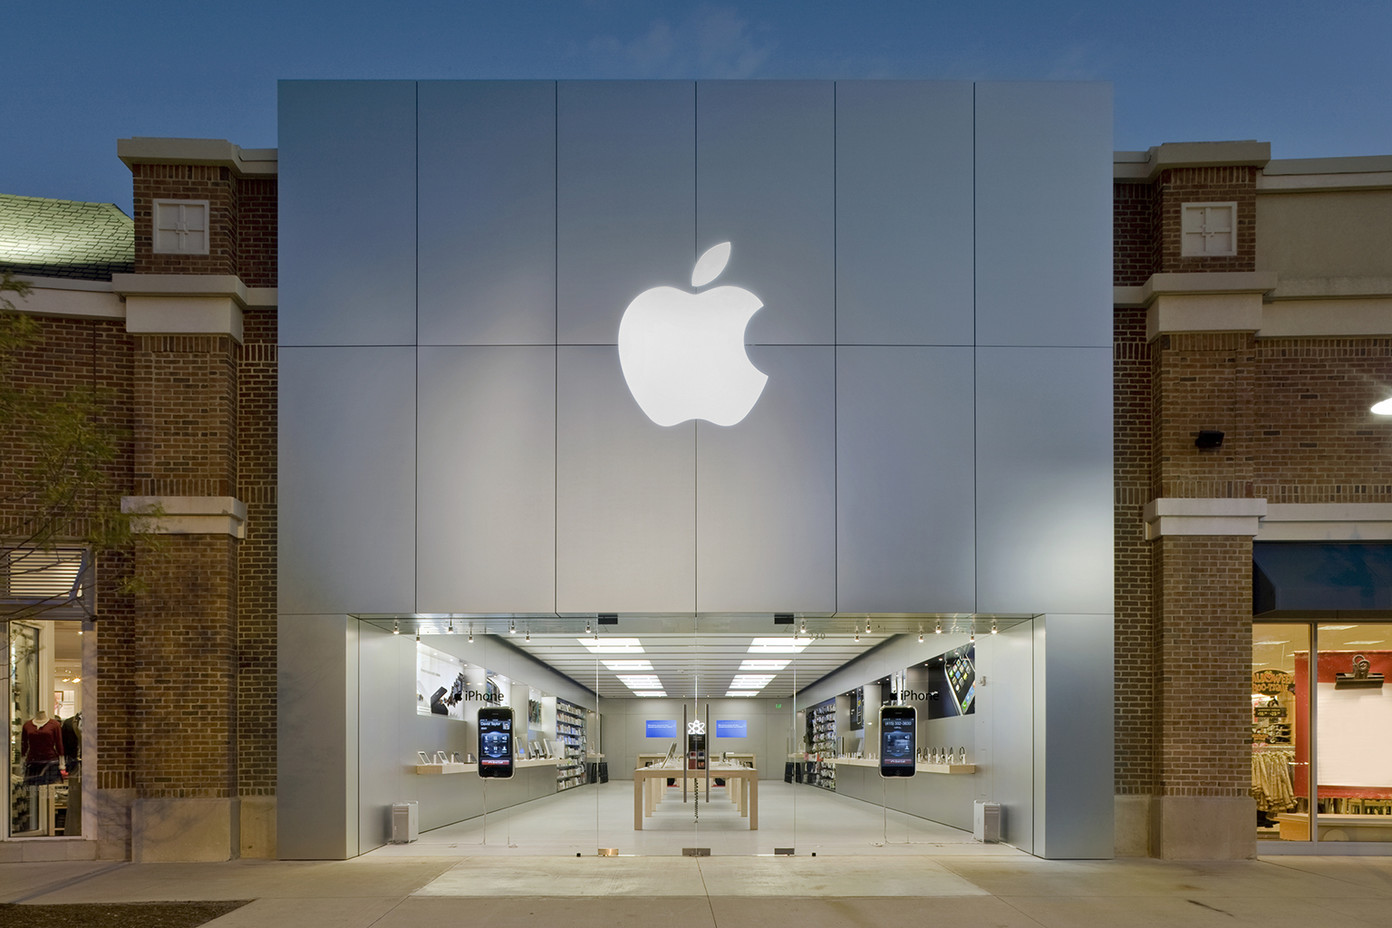 Six people arrested for making fraudulent Apple Store purchases in the United States